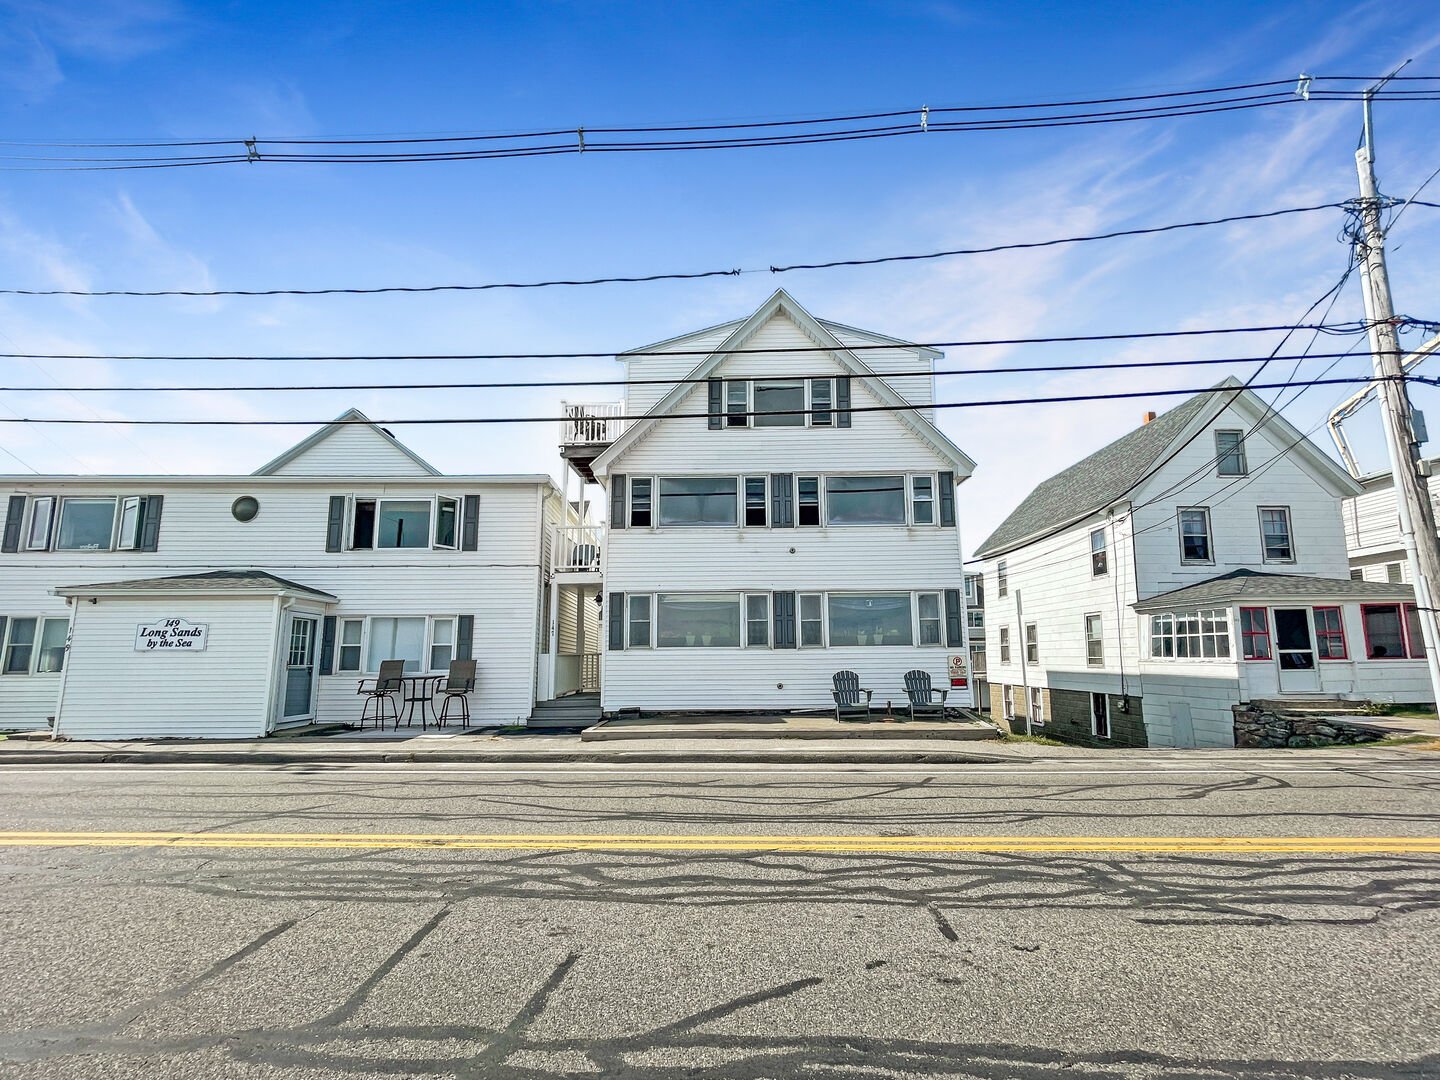 Condo Building, located across the street from Long Sands Beach. Condo is the top floor.